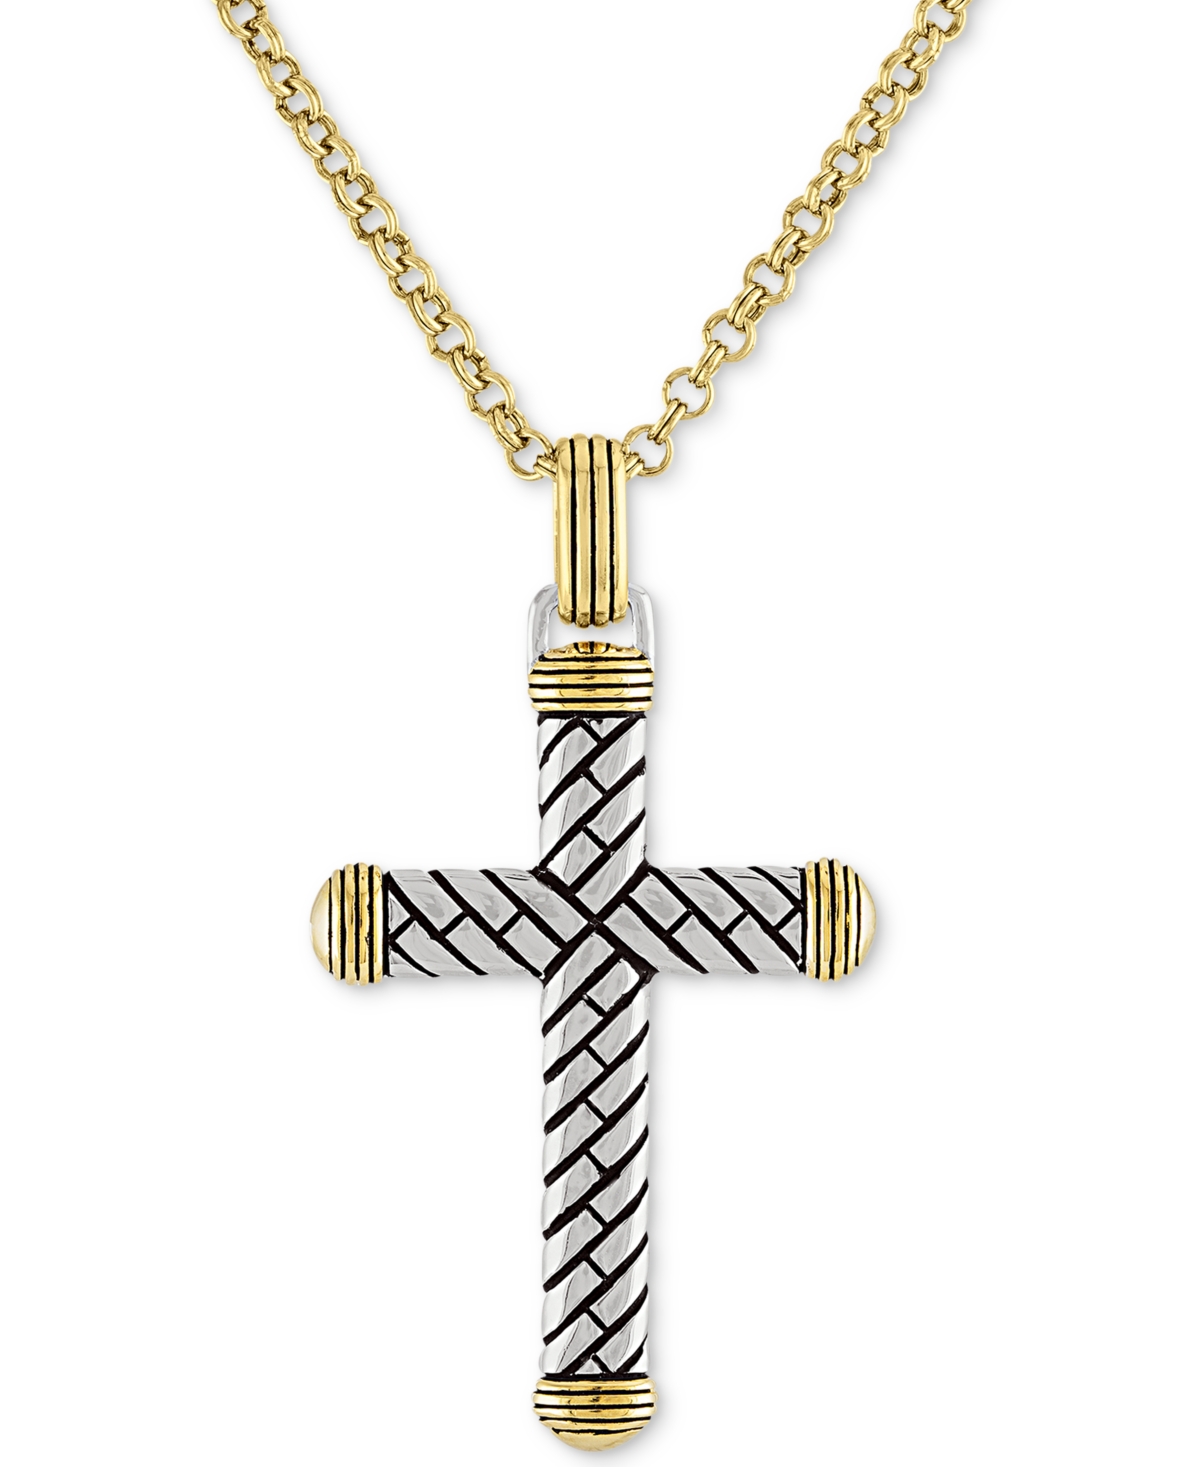 Textured Cross 22" Pendant Necklace in 14k Gold Over Sterling Silver, Created for Macy's - Silver